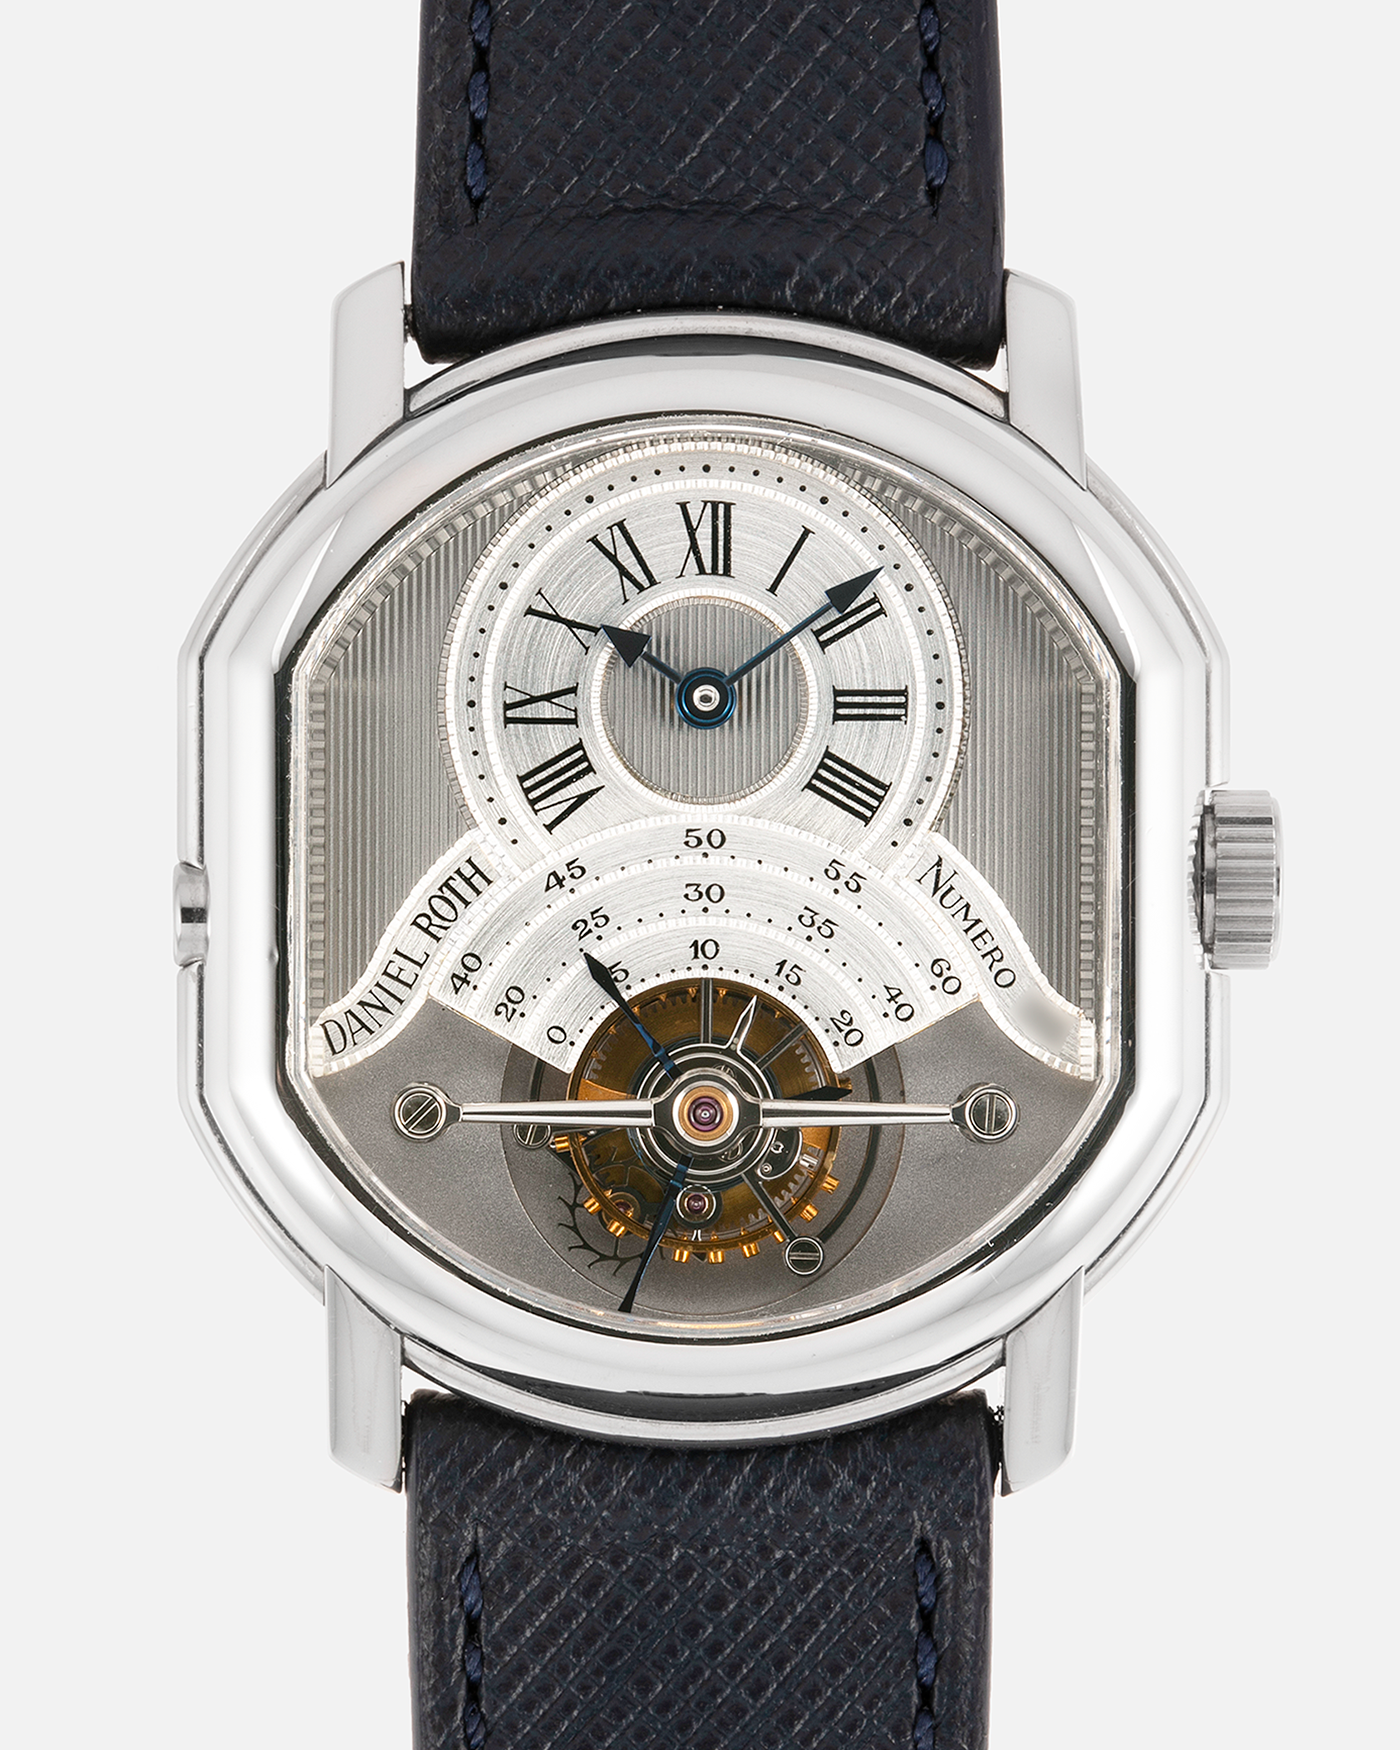 Brand: Daniel Roth Year: 1990’s Model: 2187 Material: Stainless Steel Movement: Cal. DR 307 One-Minute Tourbillon Regulator Case Diameter: 35mm X 38mm Strap: Molequin Navy Blue Textured Calf and Stainless Steel Deployant Clasp